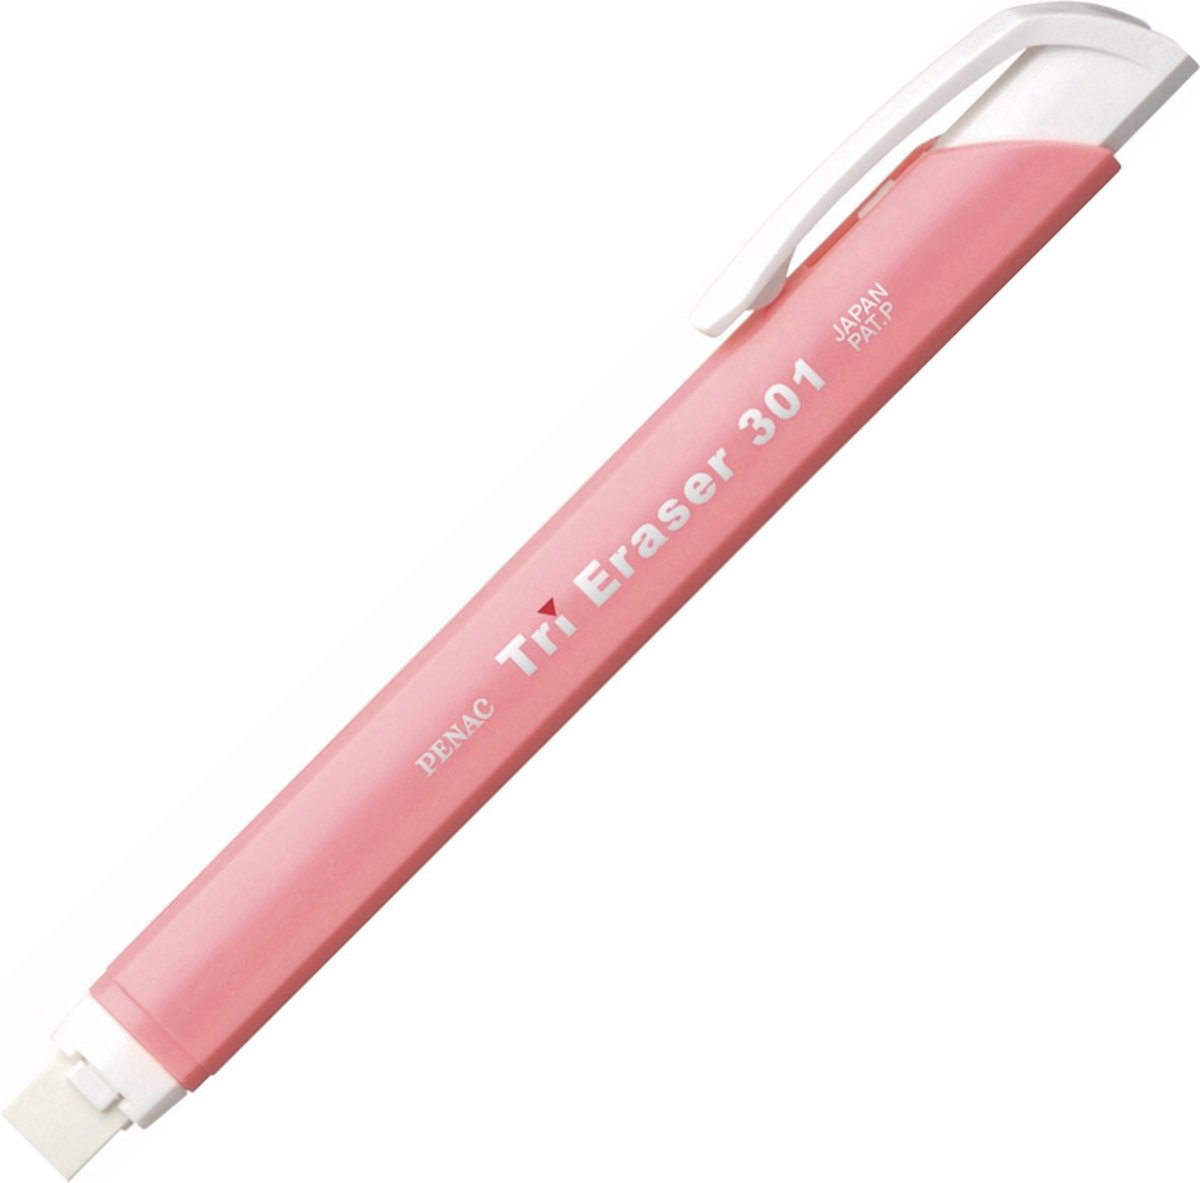 Penac Japan - Crayon Gomme - Stylo Gum - Rose - rechargeable - Crayon gomme  8,25 mm x